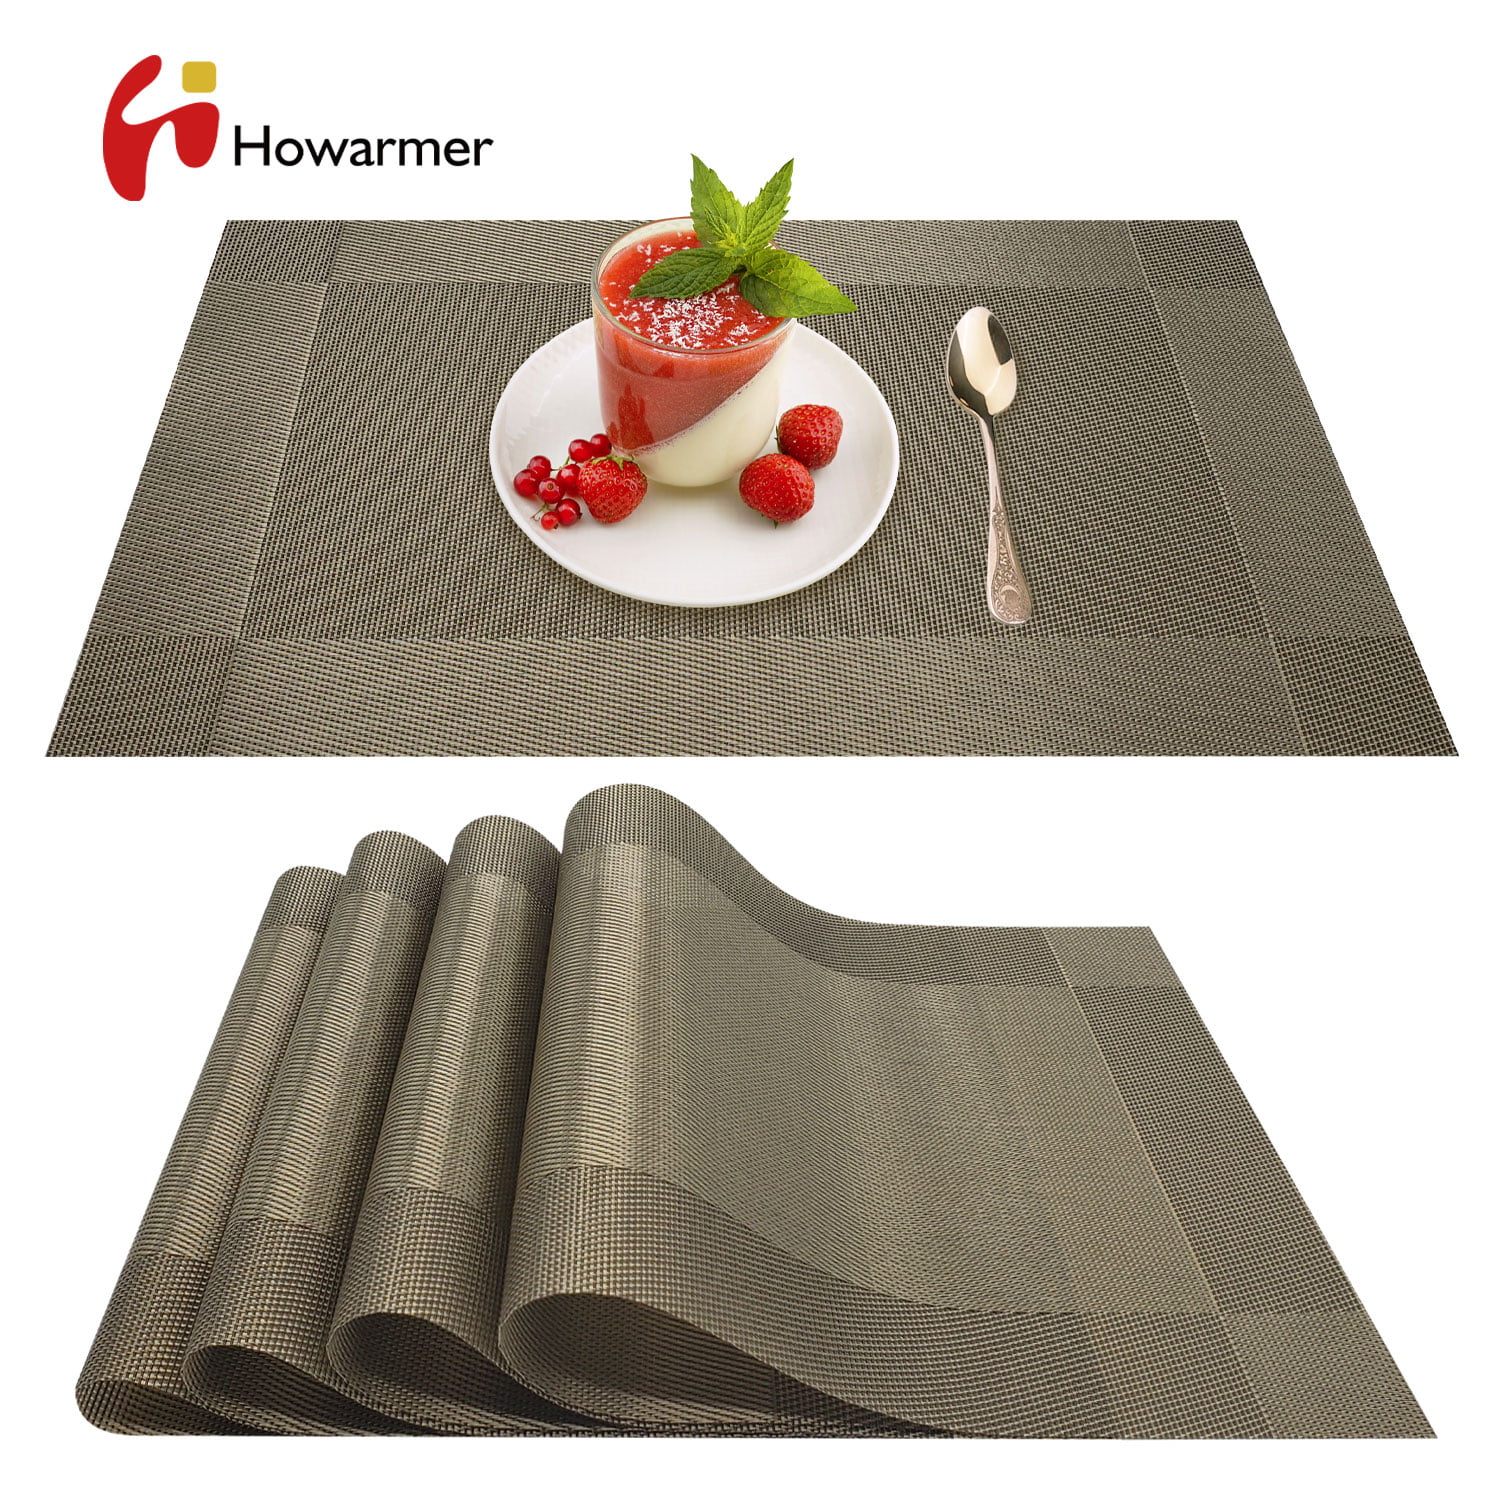 Placemats for Dinning Table Set of 4,Whole CoffeeWashable Heat-Resistant Non-Slip Table Mats 100% Polyester 18×12 Inch for Home Kitchen Modern Cloth Placemats